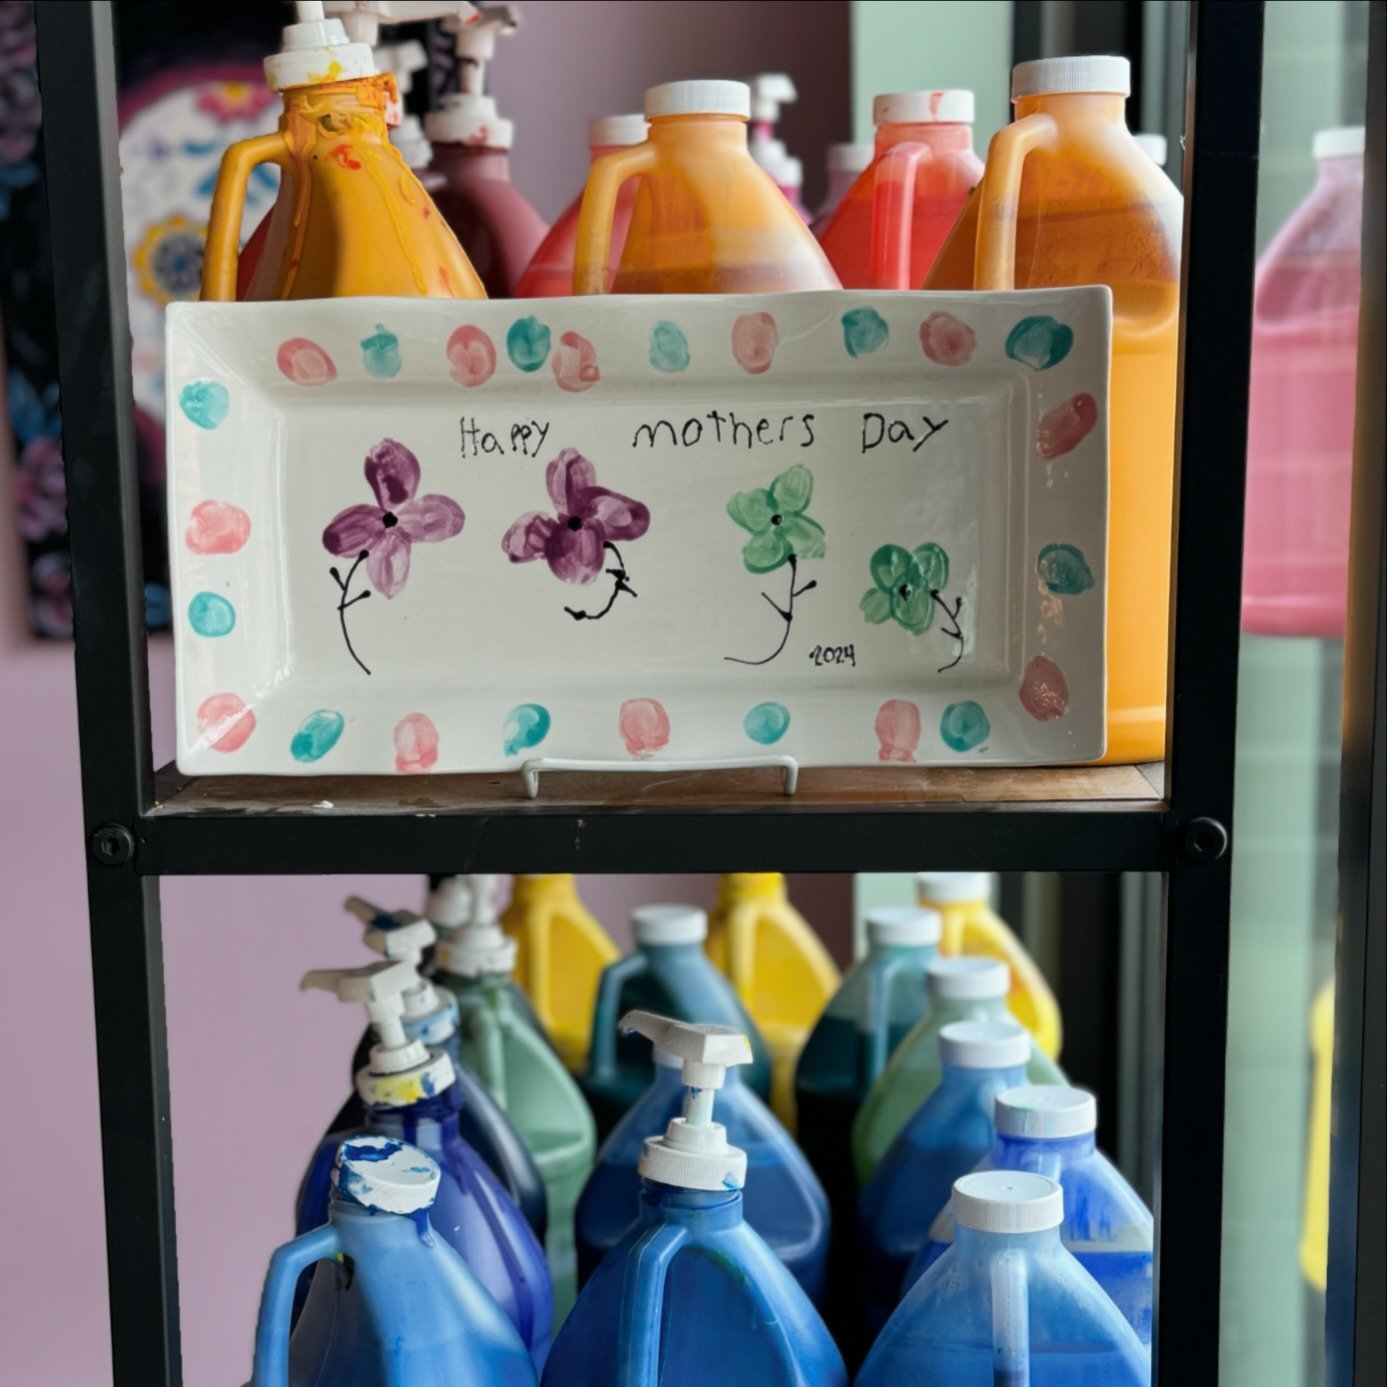 Mother&rsquo;s Day is May 12th! 

Pottery takes 5-7 days for us to fire so the last day to get a pottery project painted for mom is the 5th! But we have take home the same day projects as well for mom, as well as gift cards for mom AND you can bring 